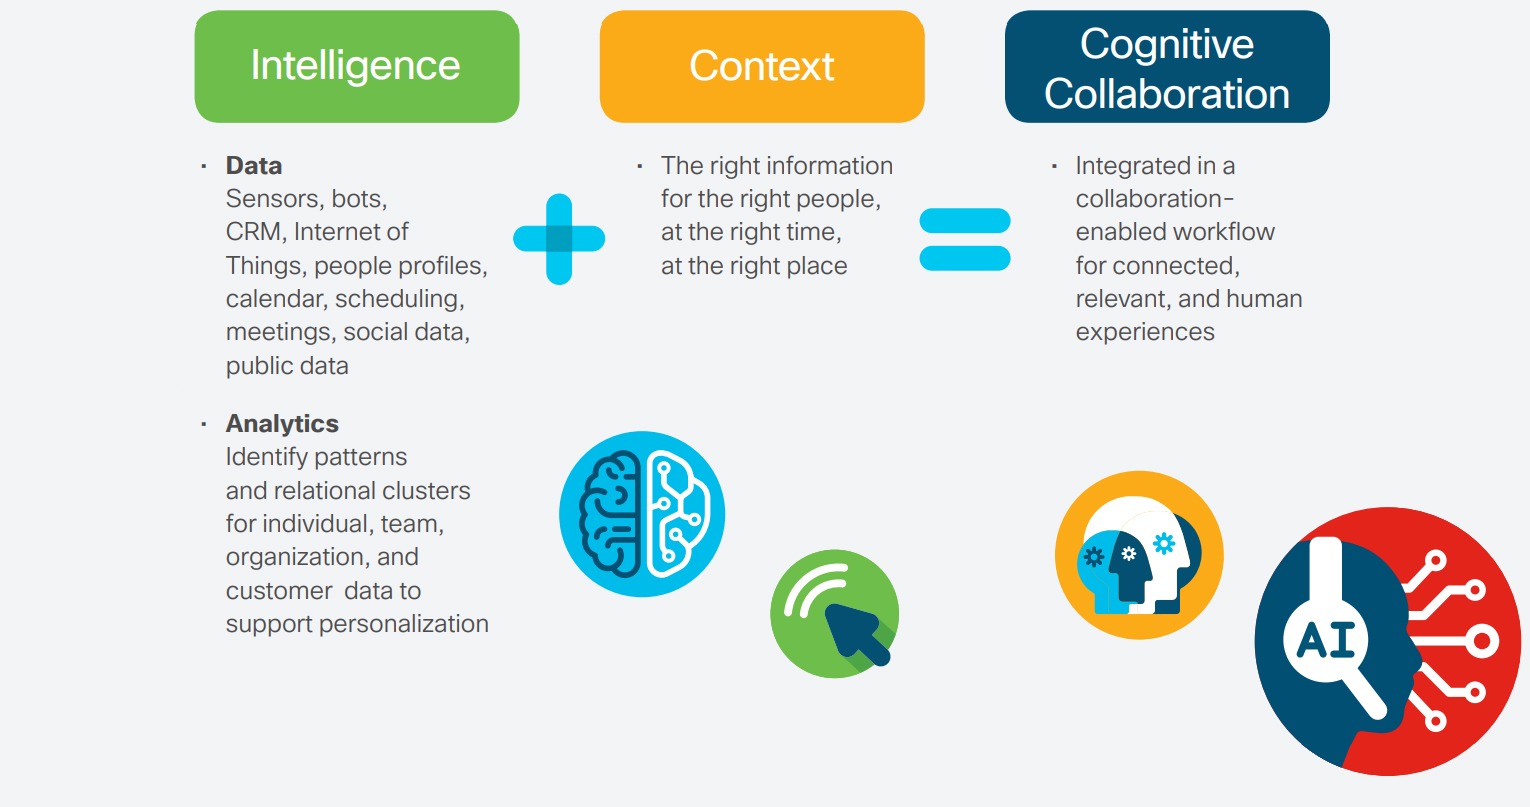 Intelligence + Context = Cognitive Collaboration 